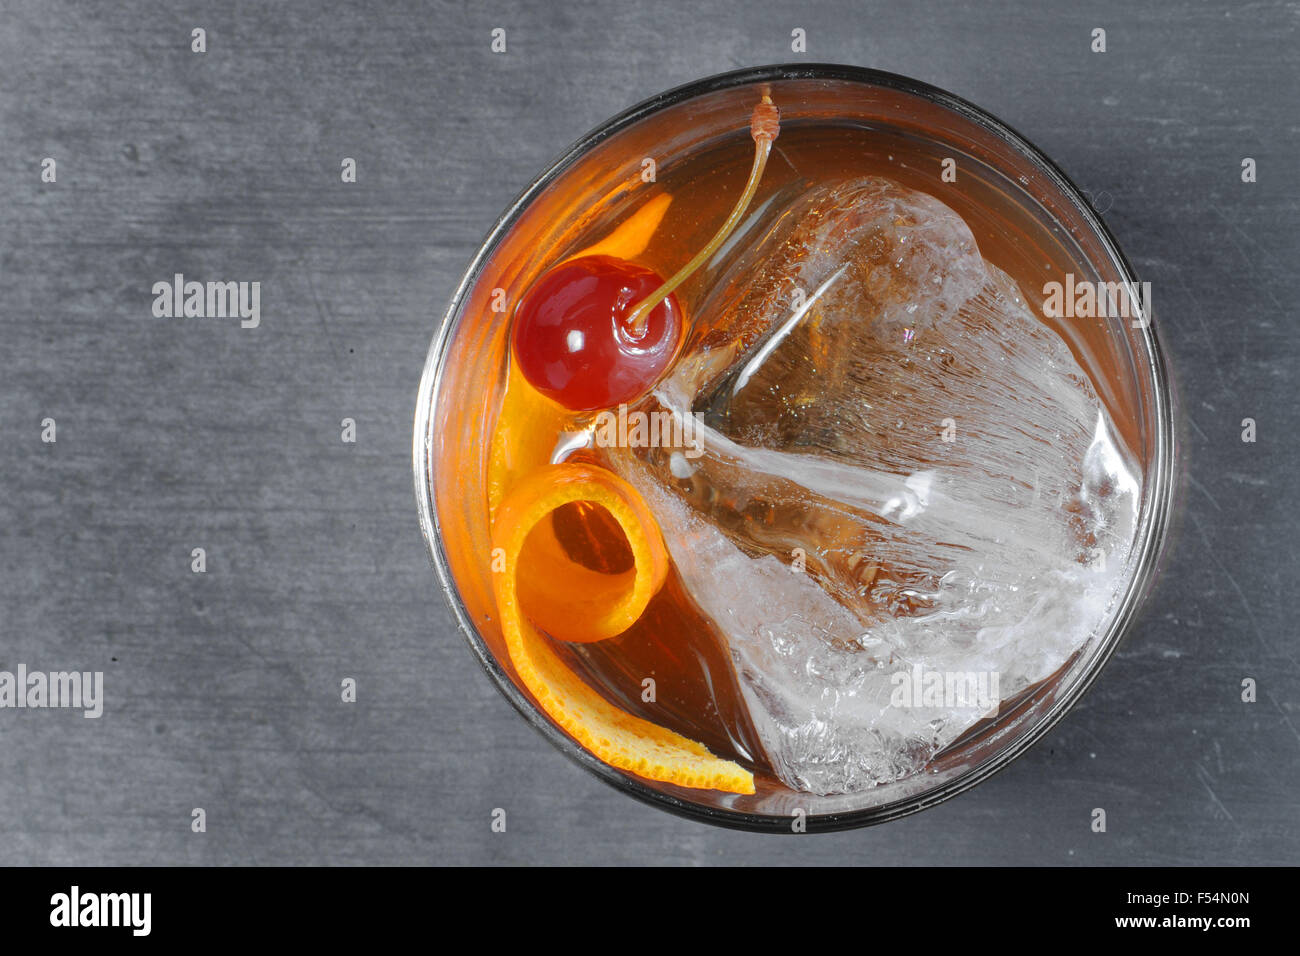 A glass of gin with ice, orange peel and a cherry. Stock Photo